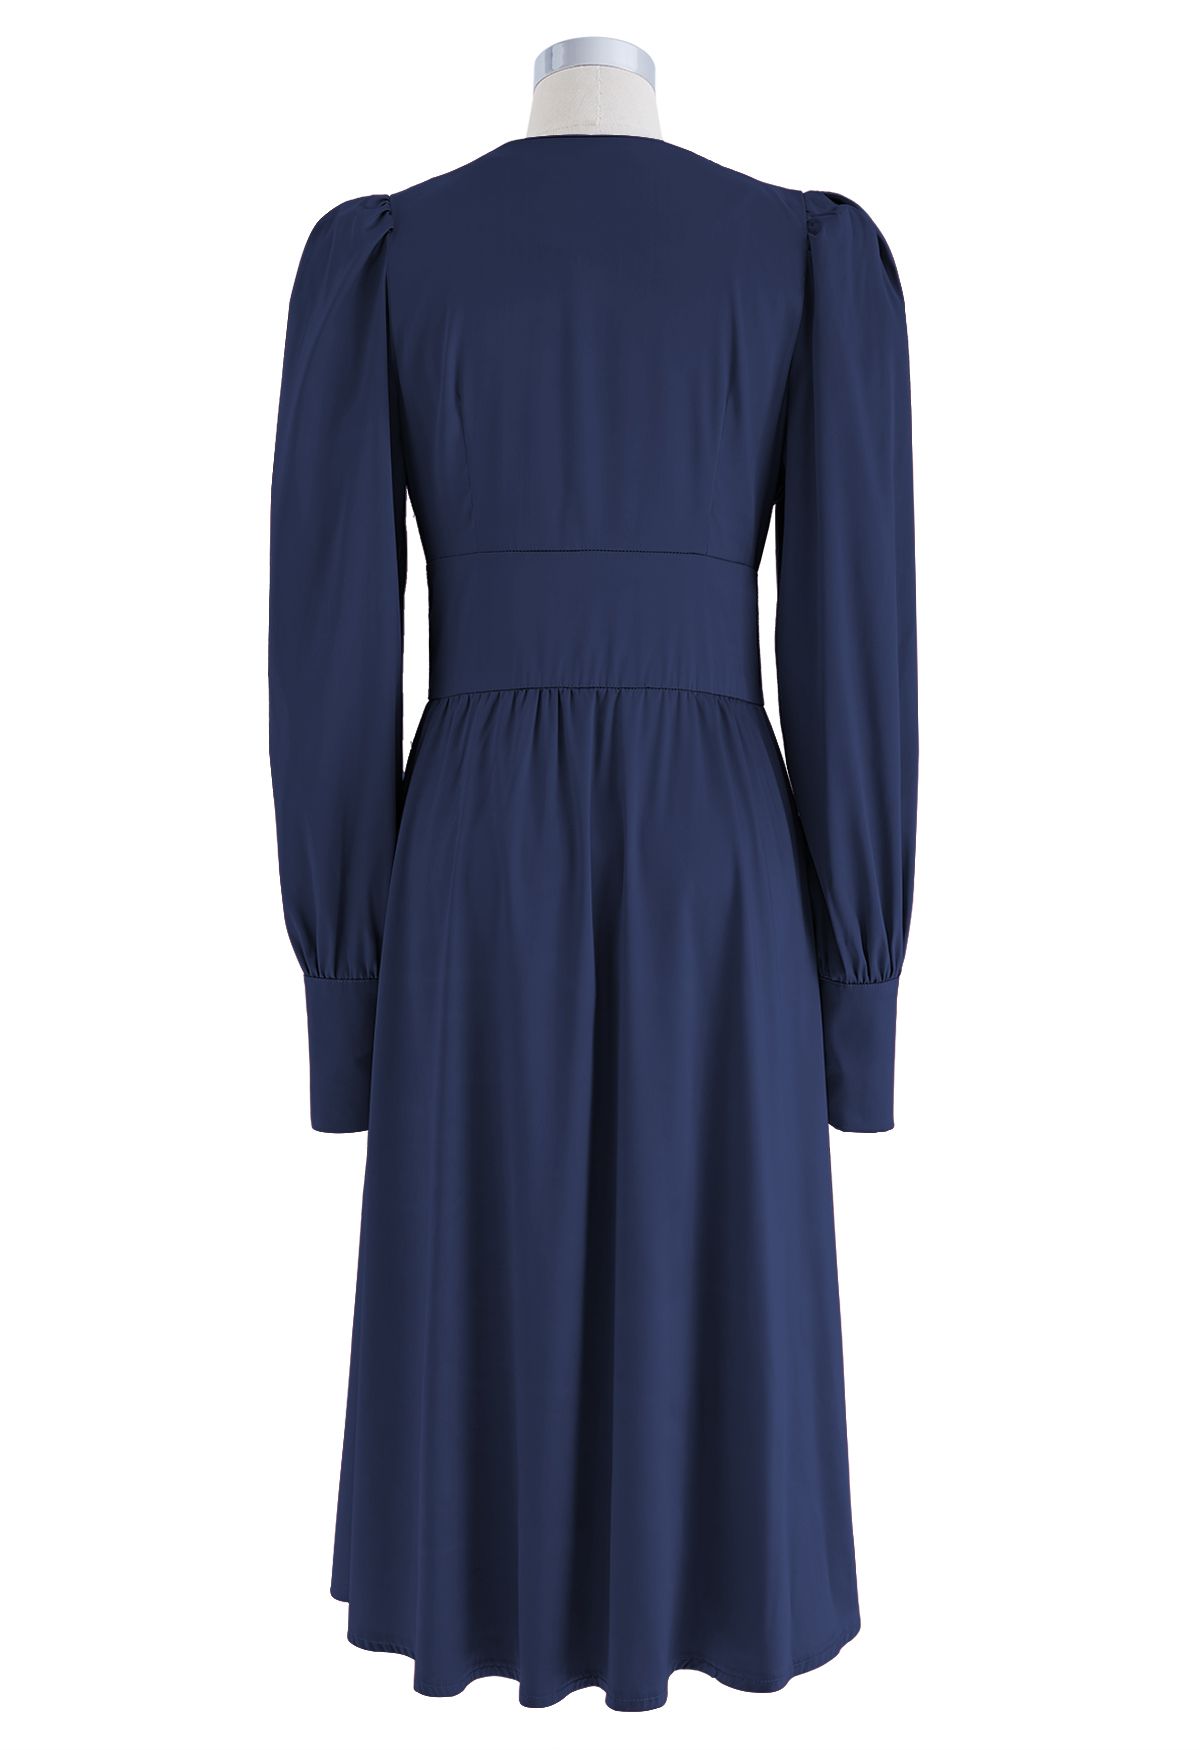 Puff Sleeves Button Up Satin Midi Dress in Navy - Retro, Indie and ...